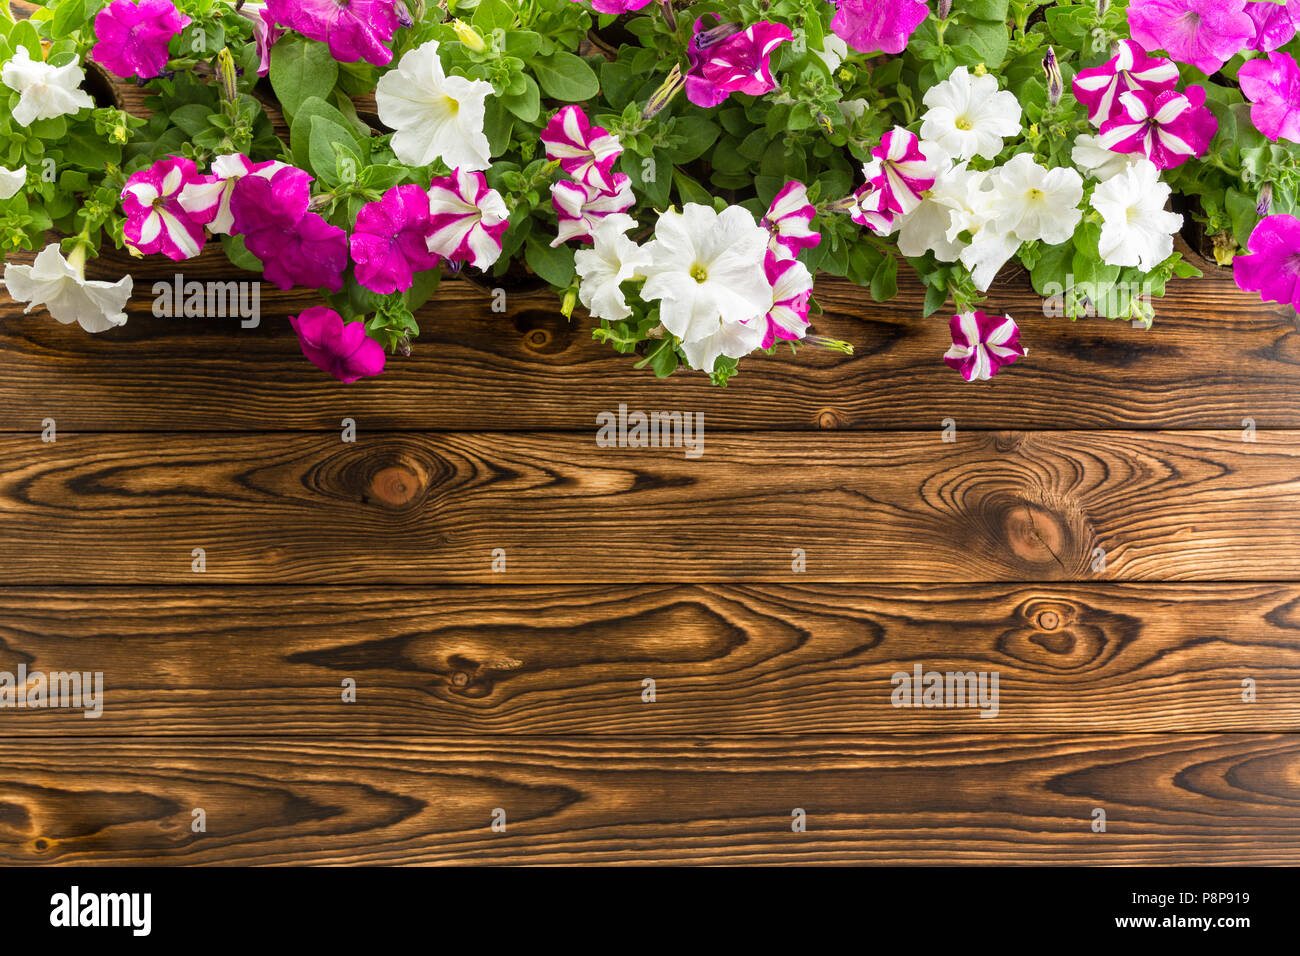 Spring flower border with colorful potted petunias in white and magenta over a rustic wooden garden table with woodgrain pattern and copy space Stock Photo